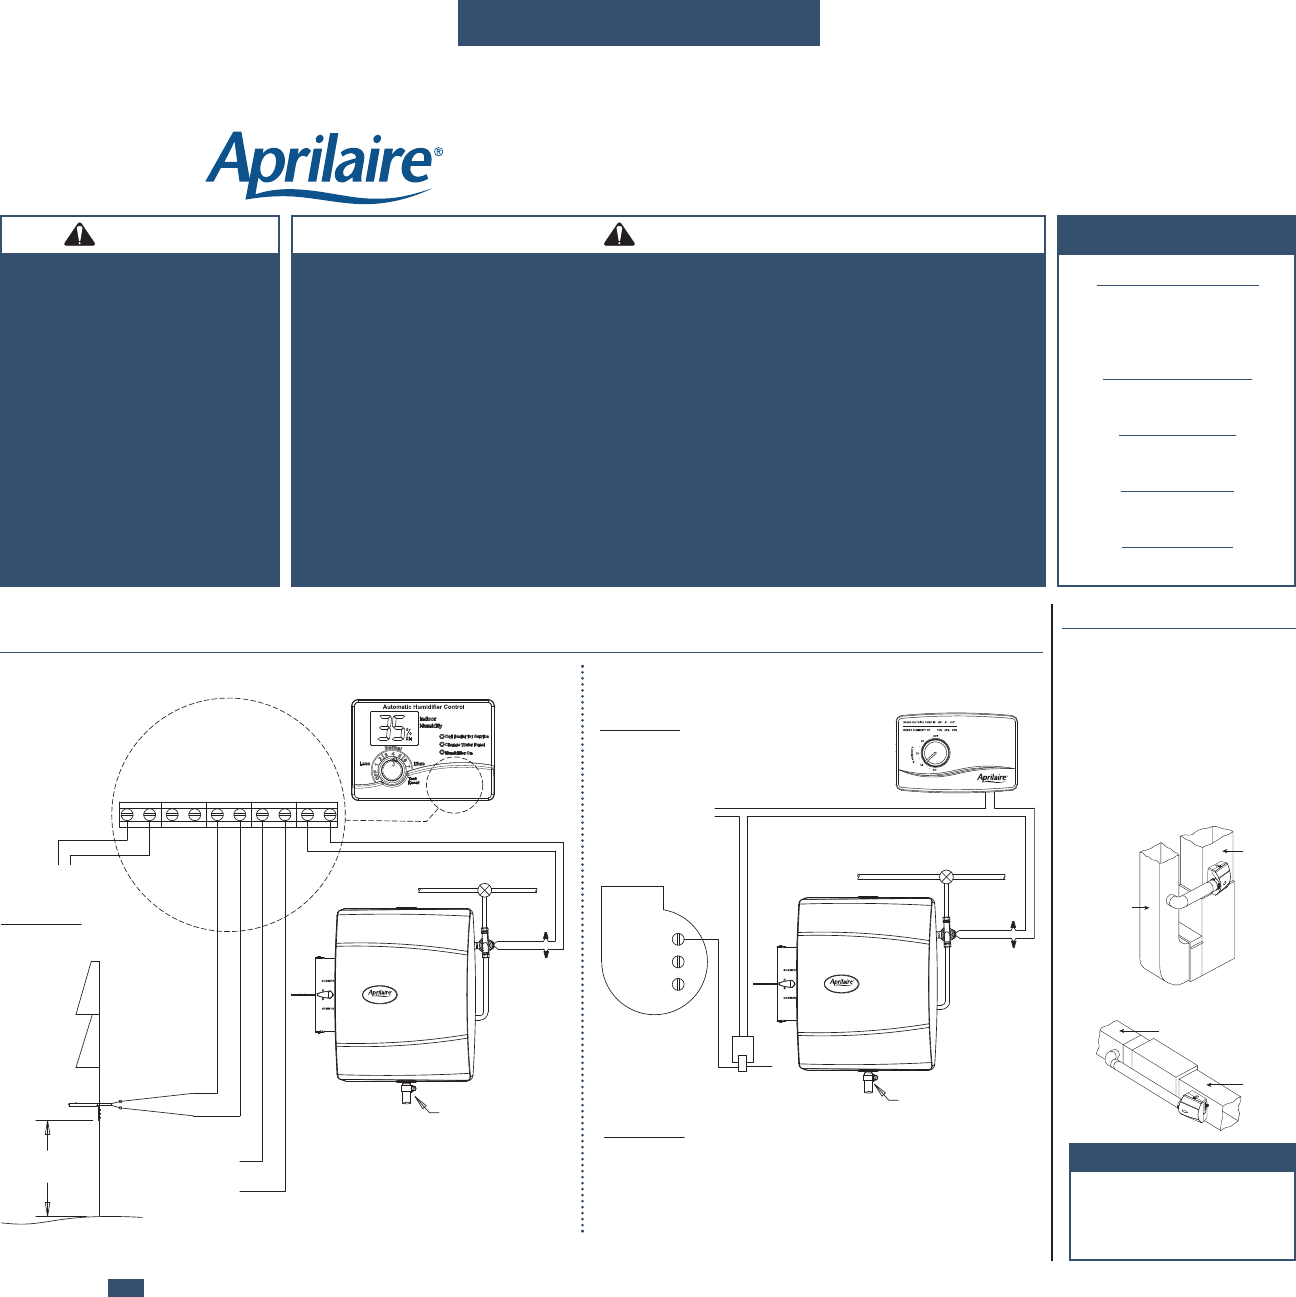 Aprilaire 550 Wiring Diagram from pdfasset.owneriq.net